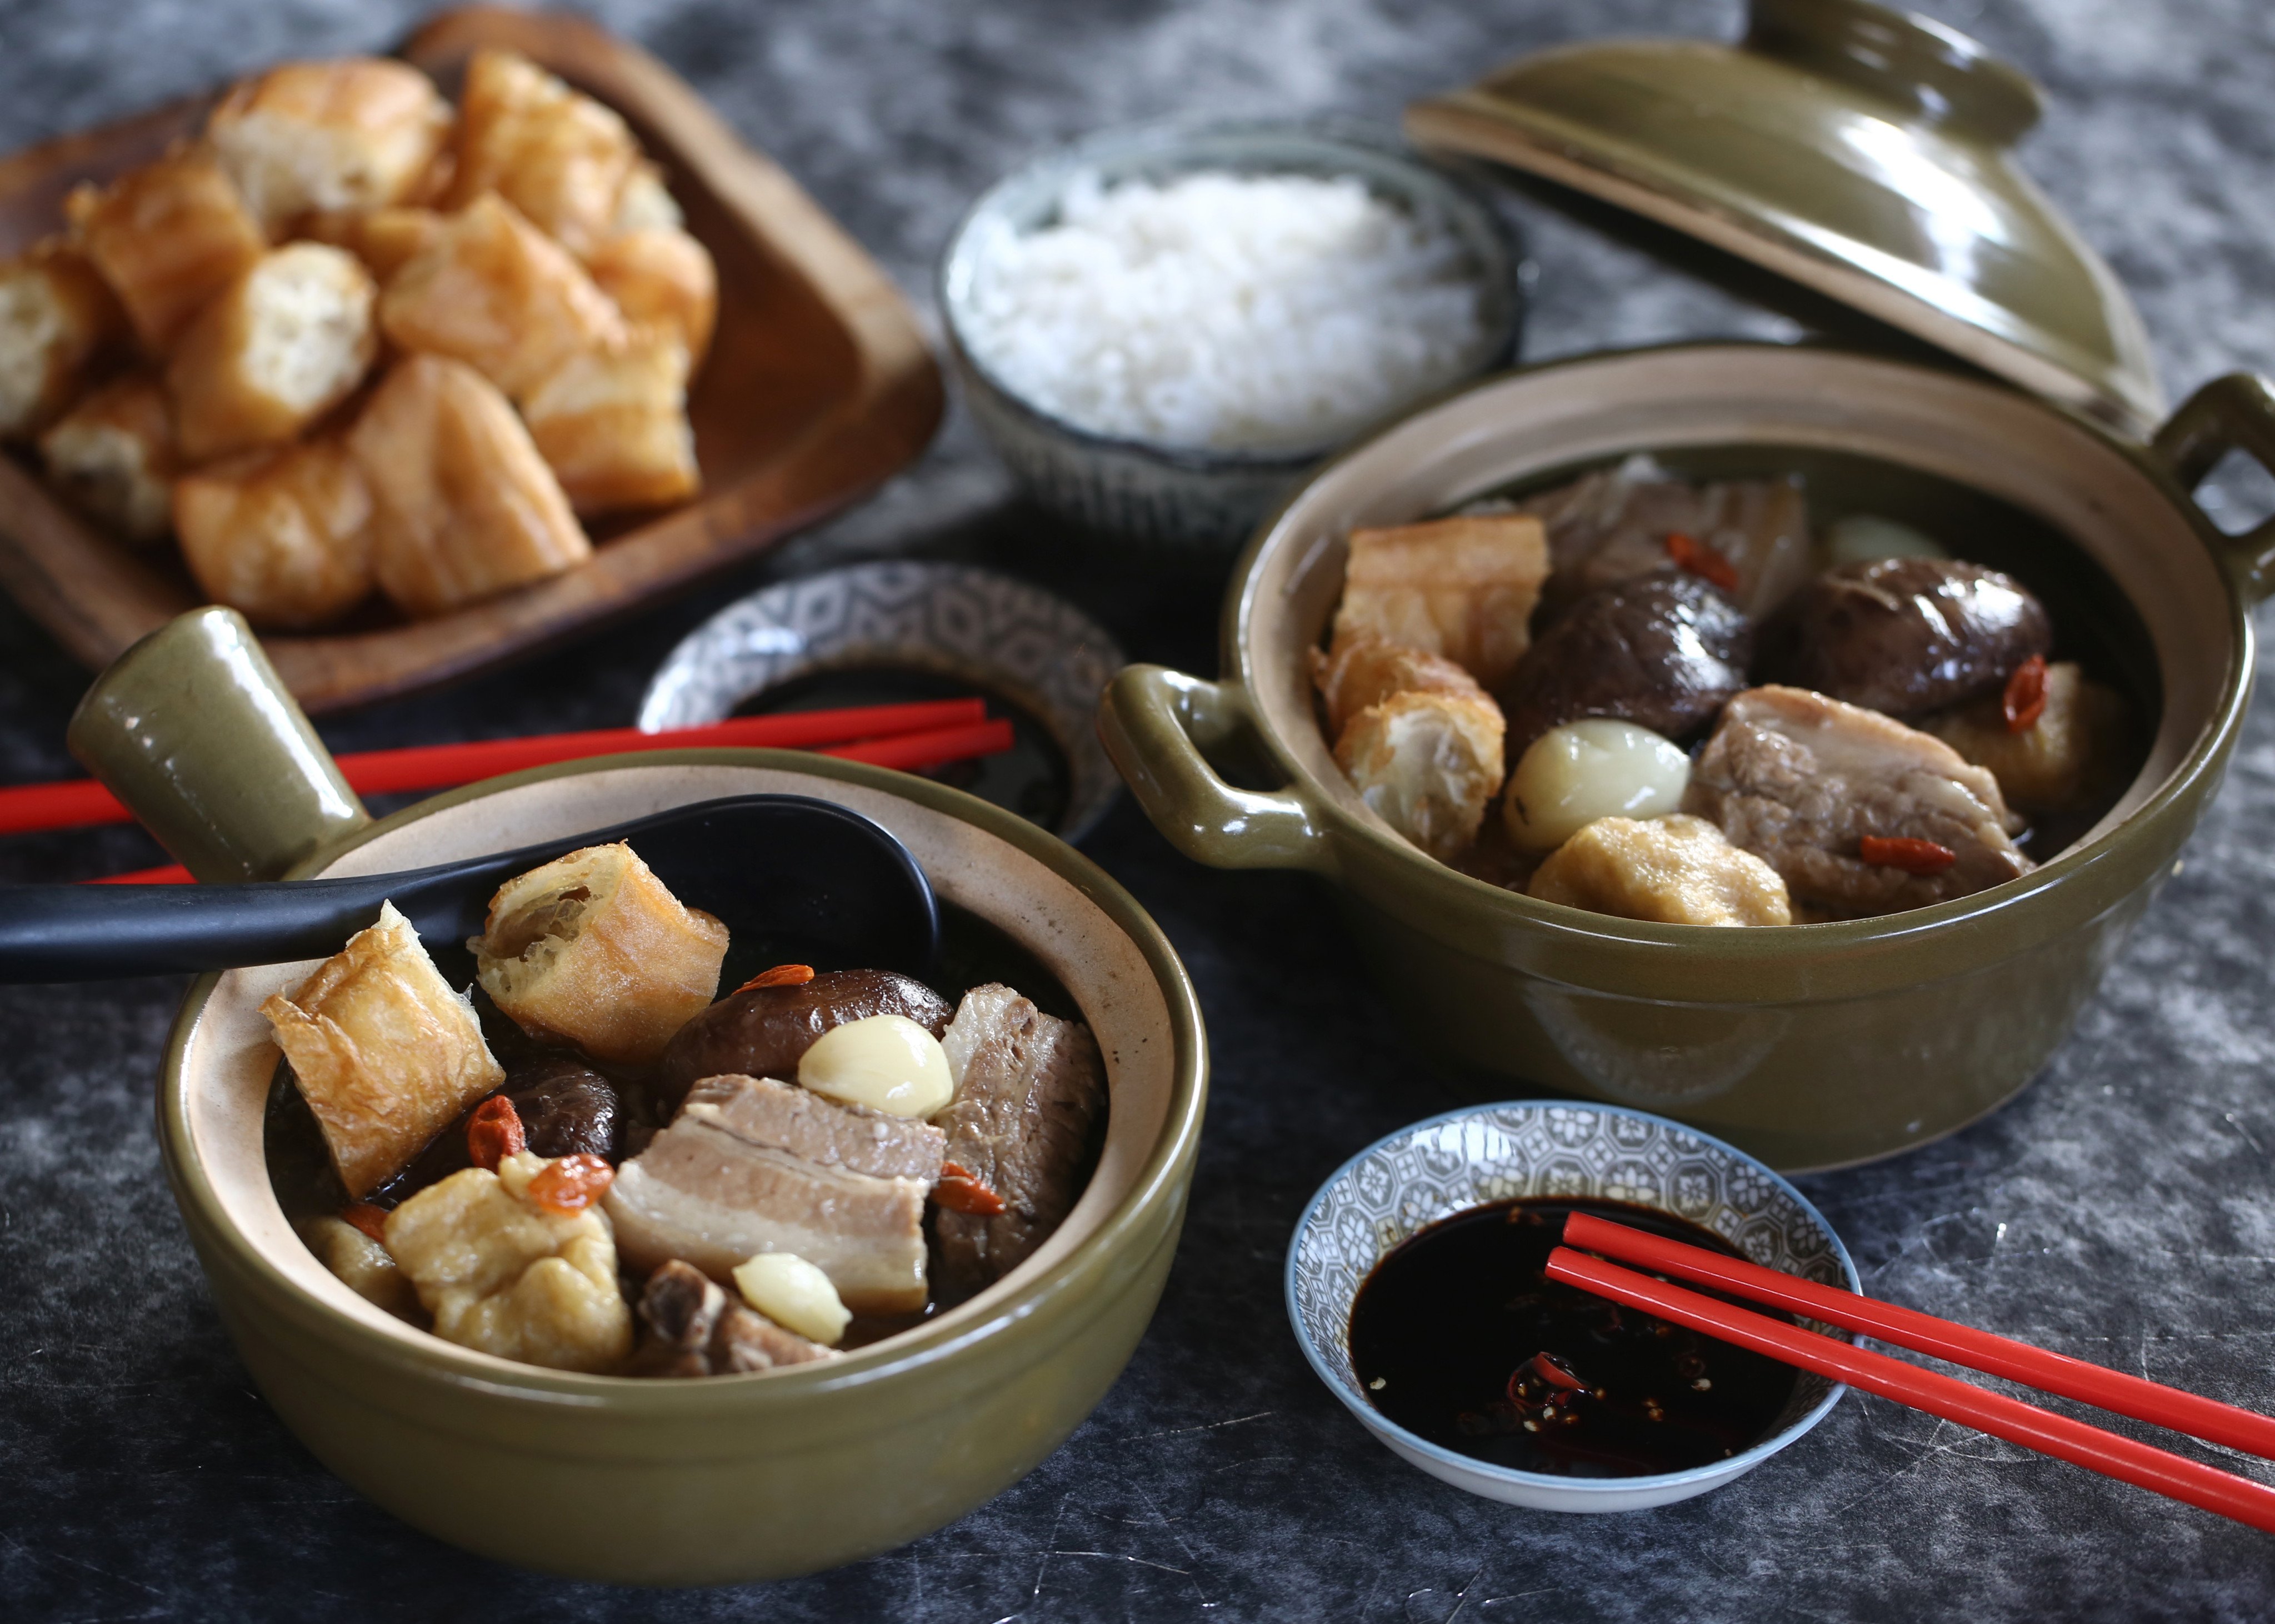 Bak kut teh has been declared as a national heritage dish in Malaysia. Photo: SCMP